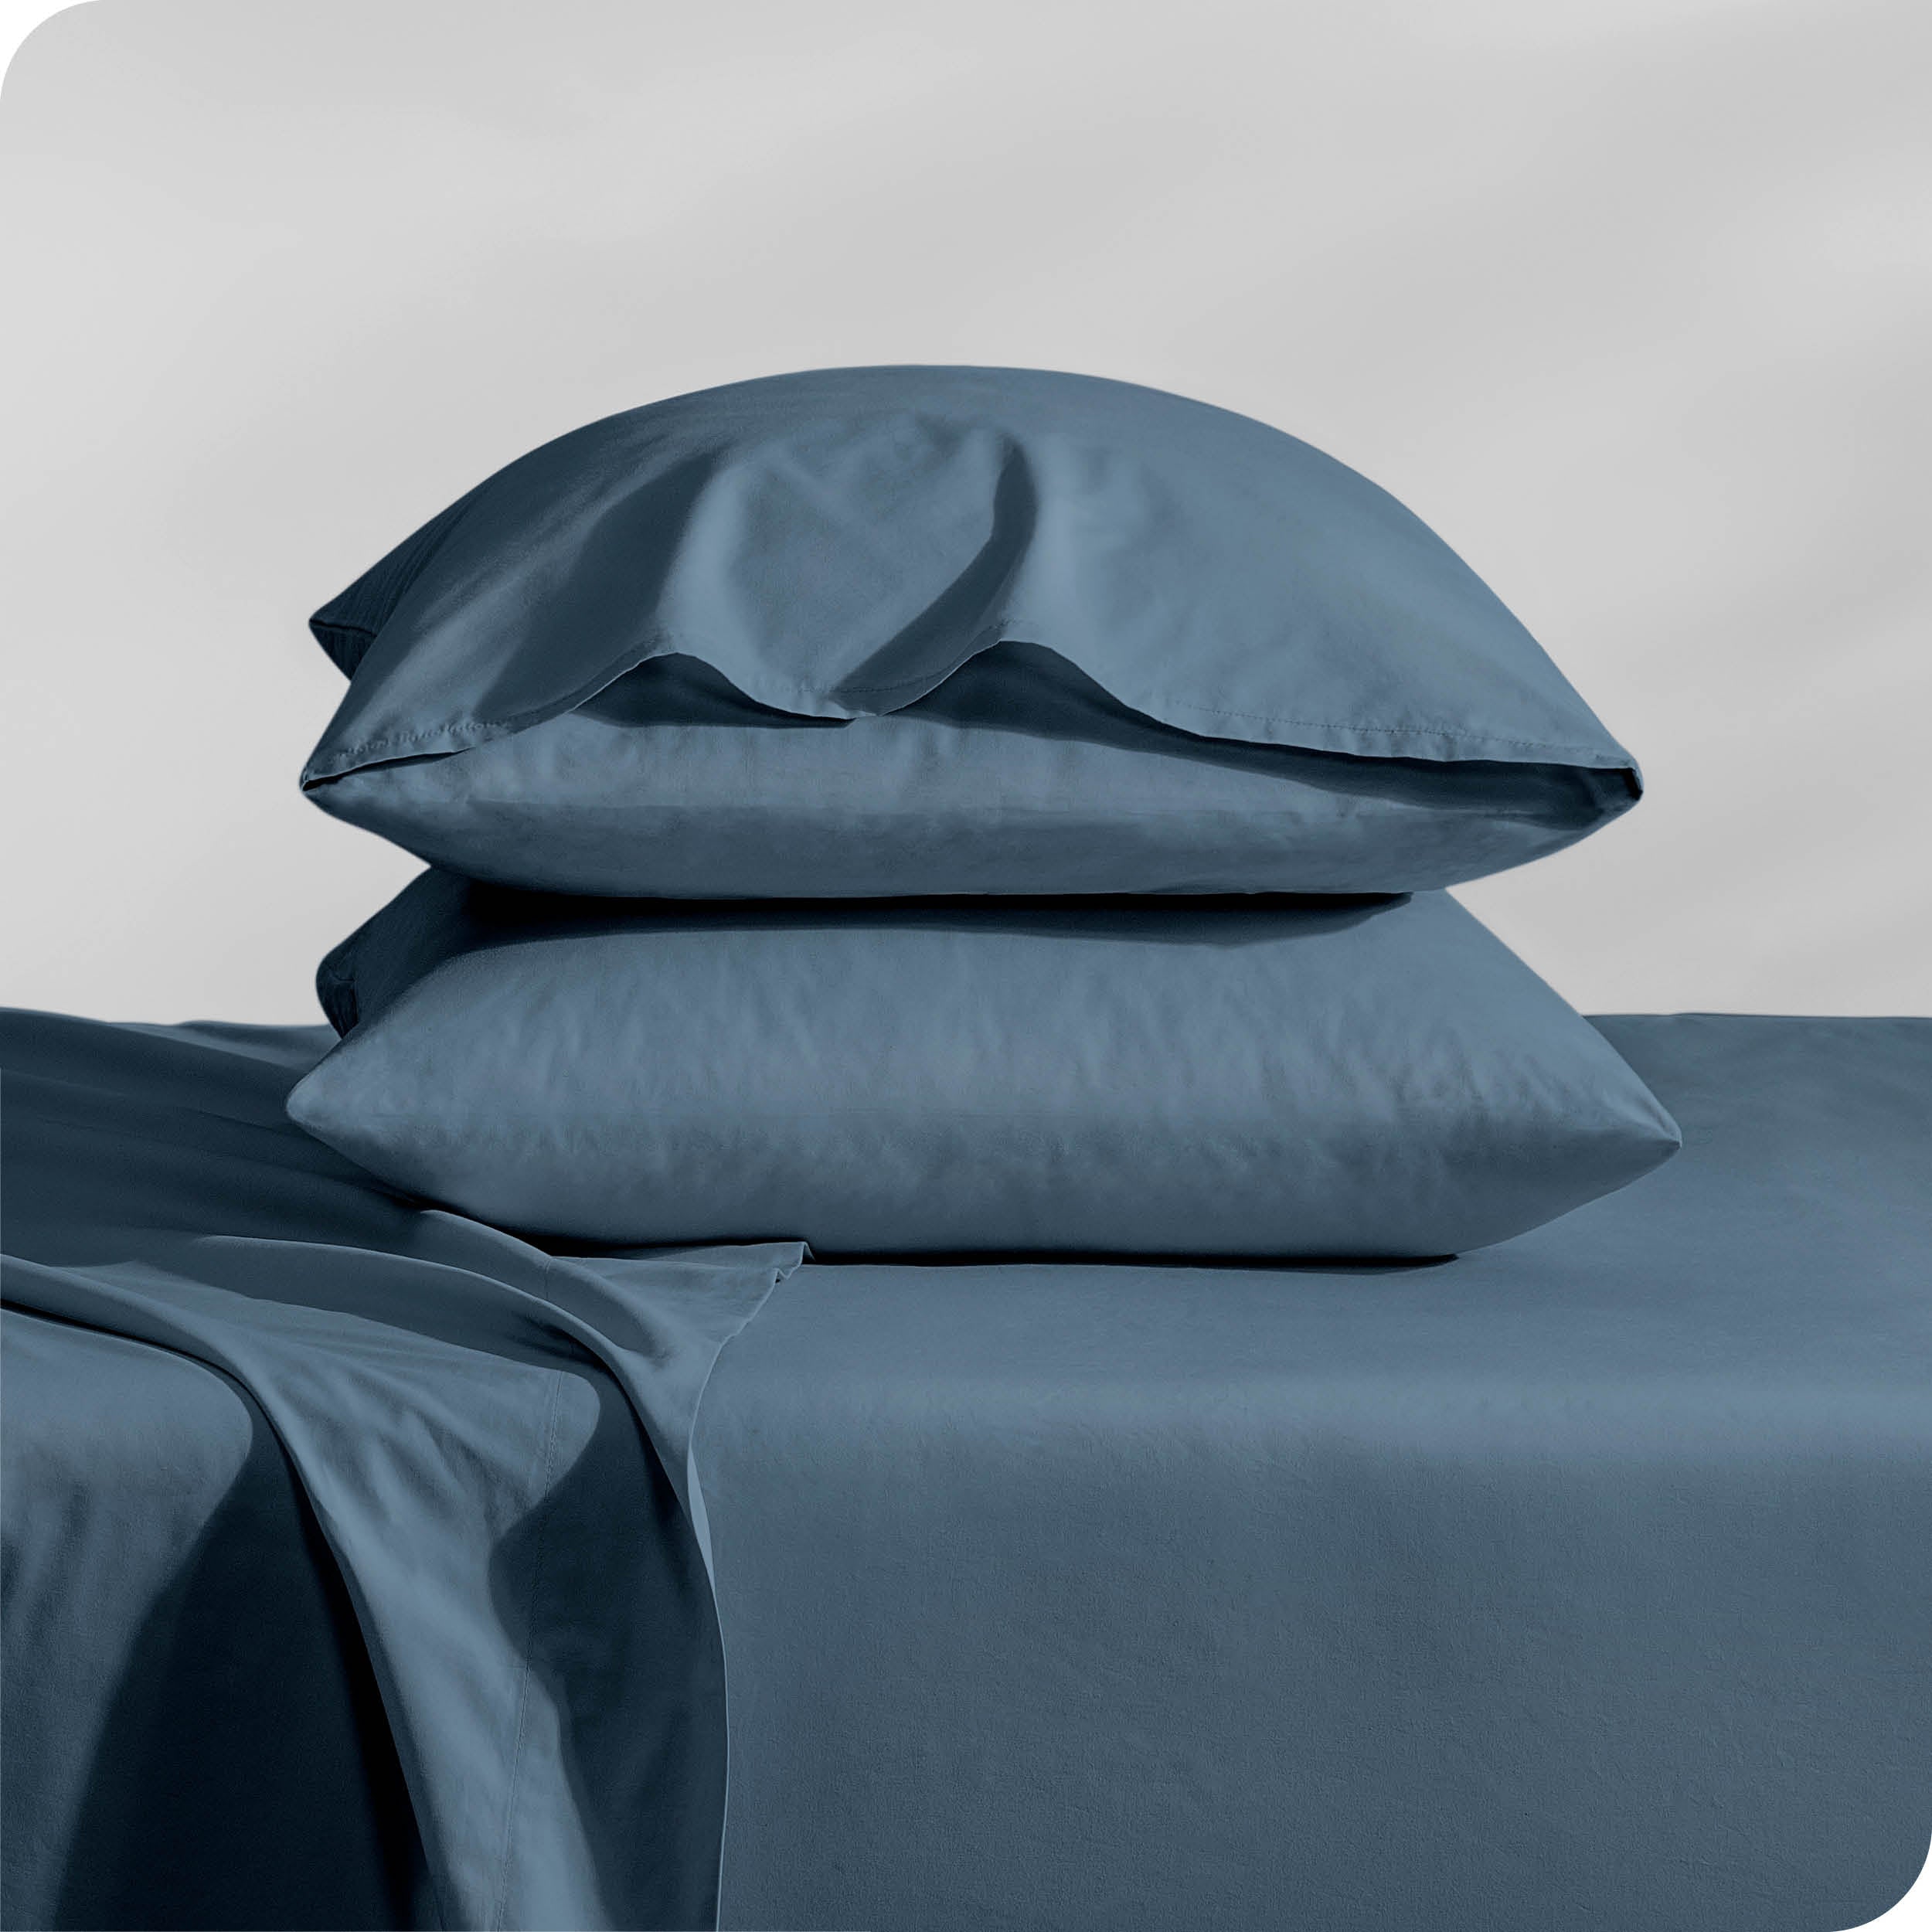 Pillows inside percale pillowcases stacked on a bed